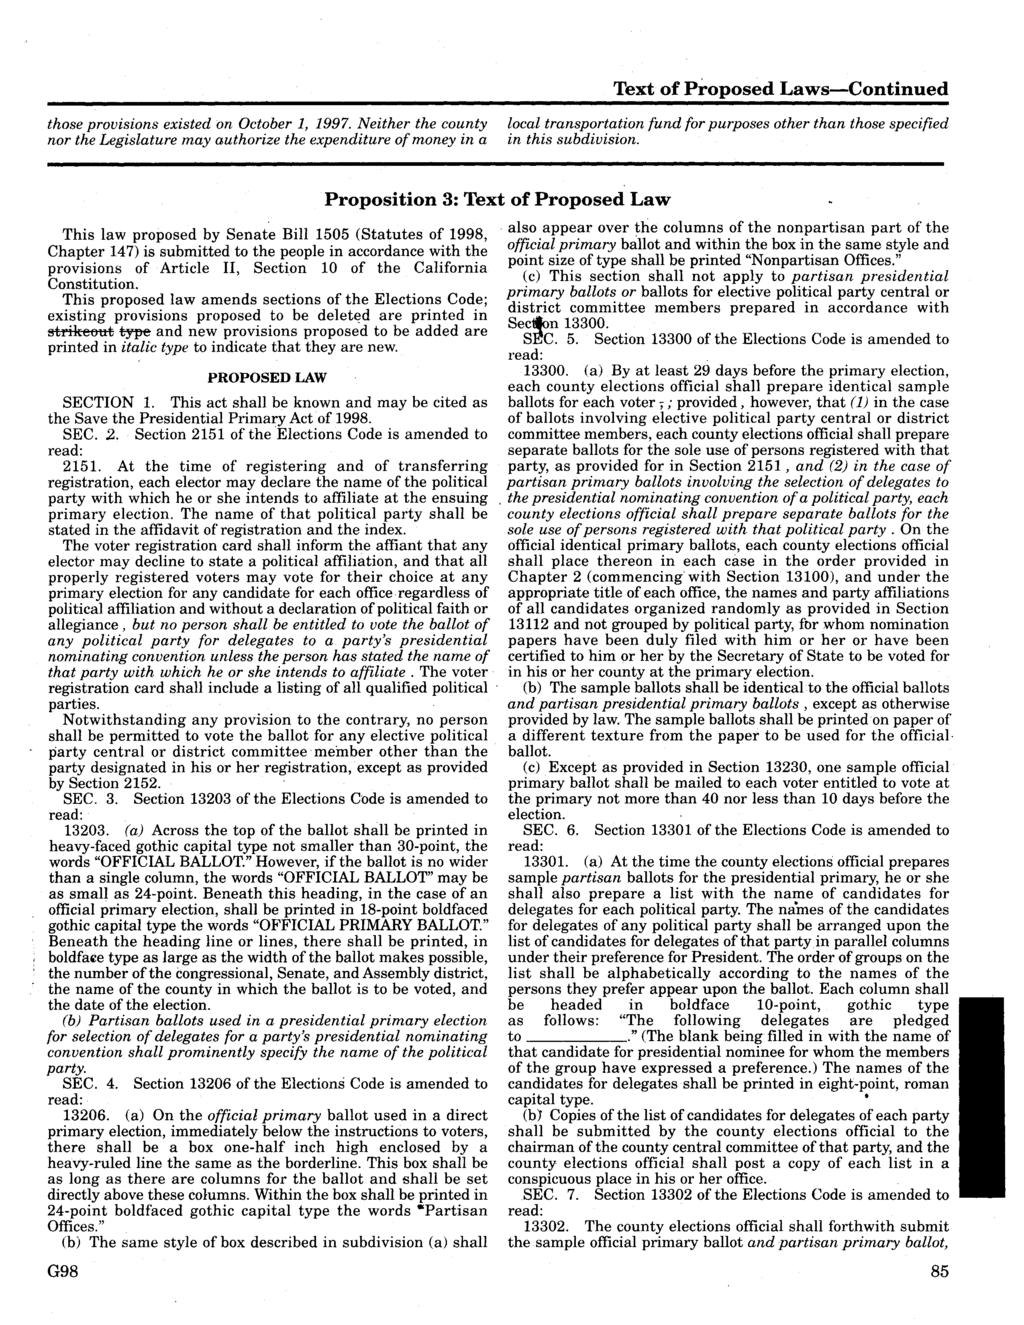 Text of Proposed Laws-Continued those provisions existed on October 1, 1997.